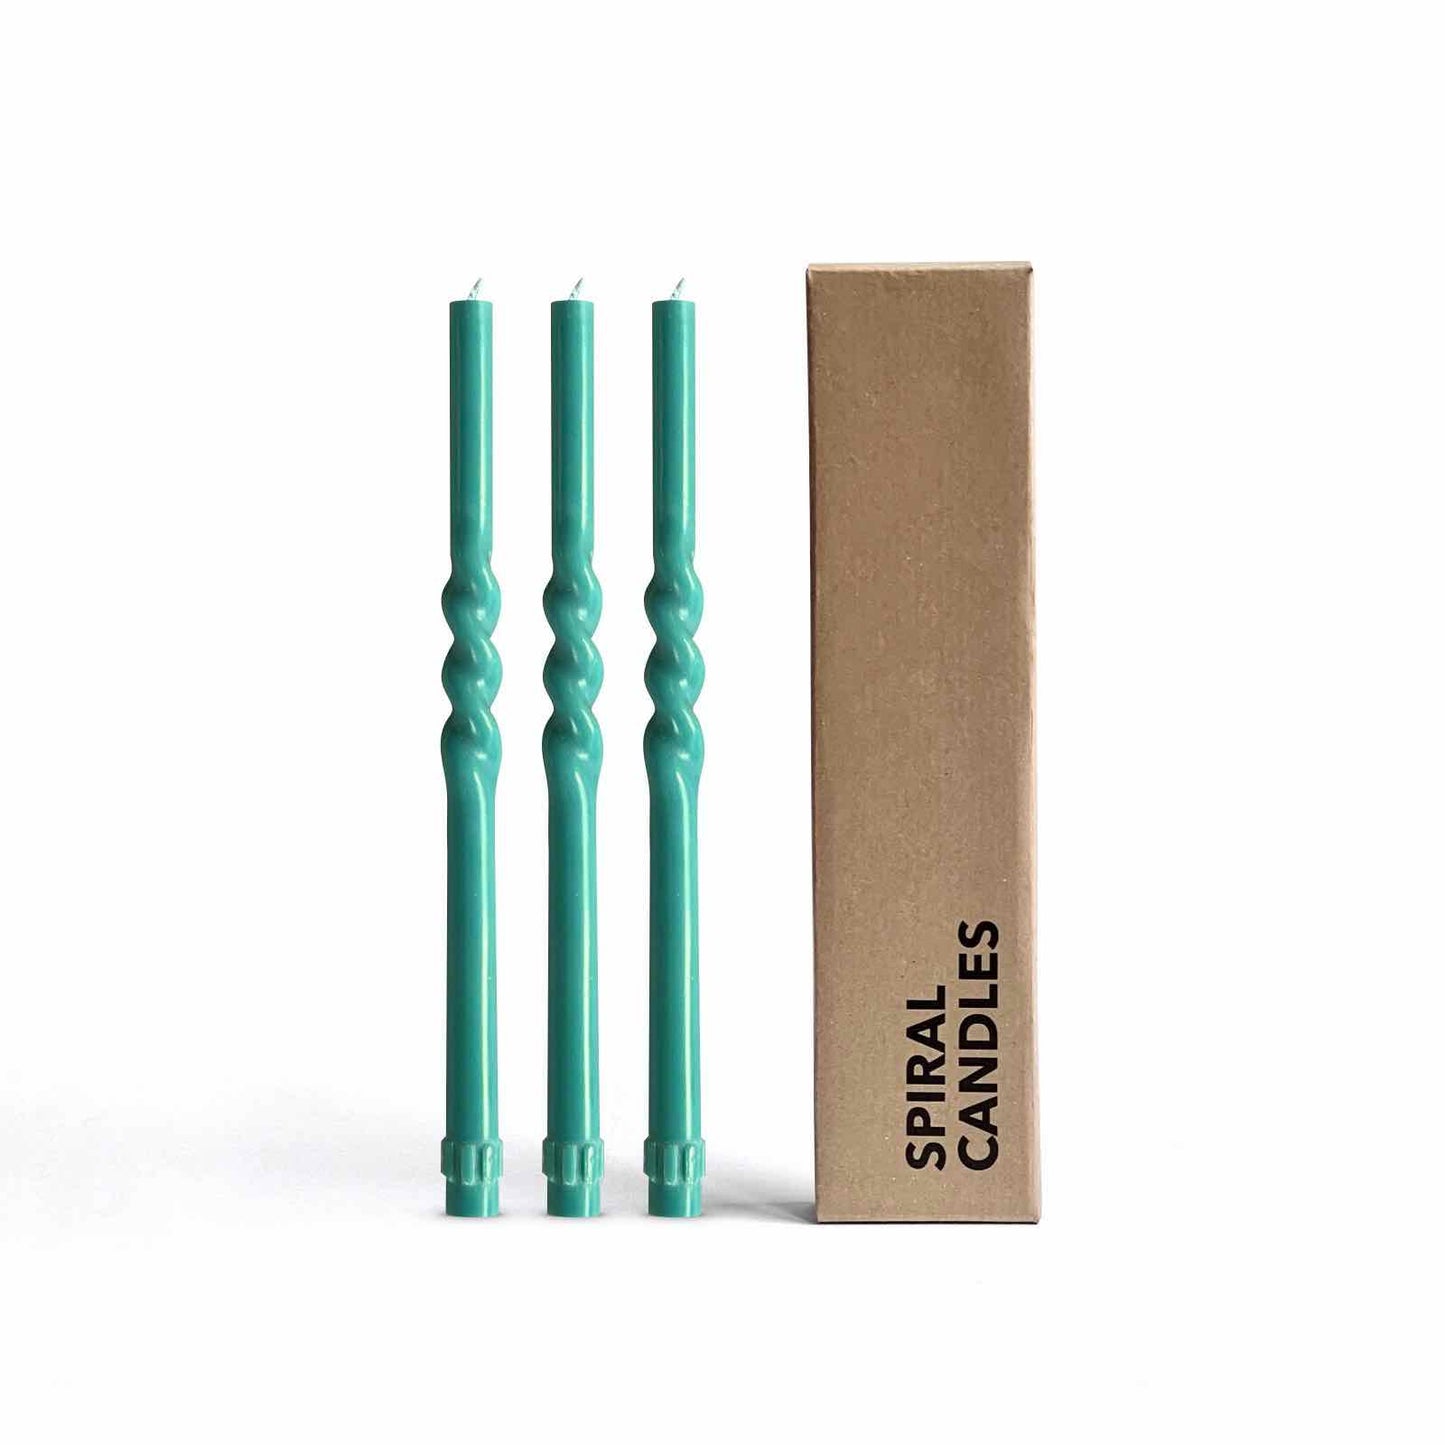 Teal taper candles